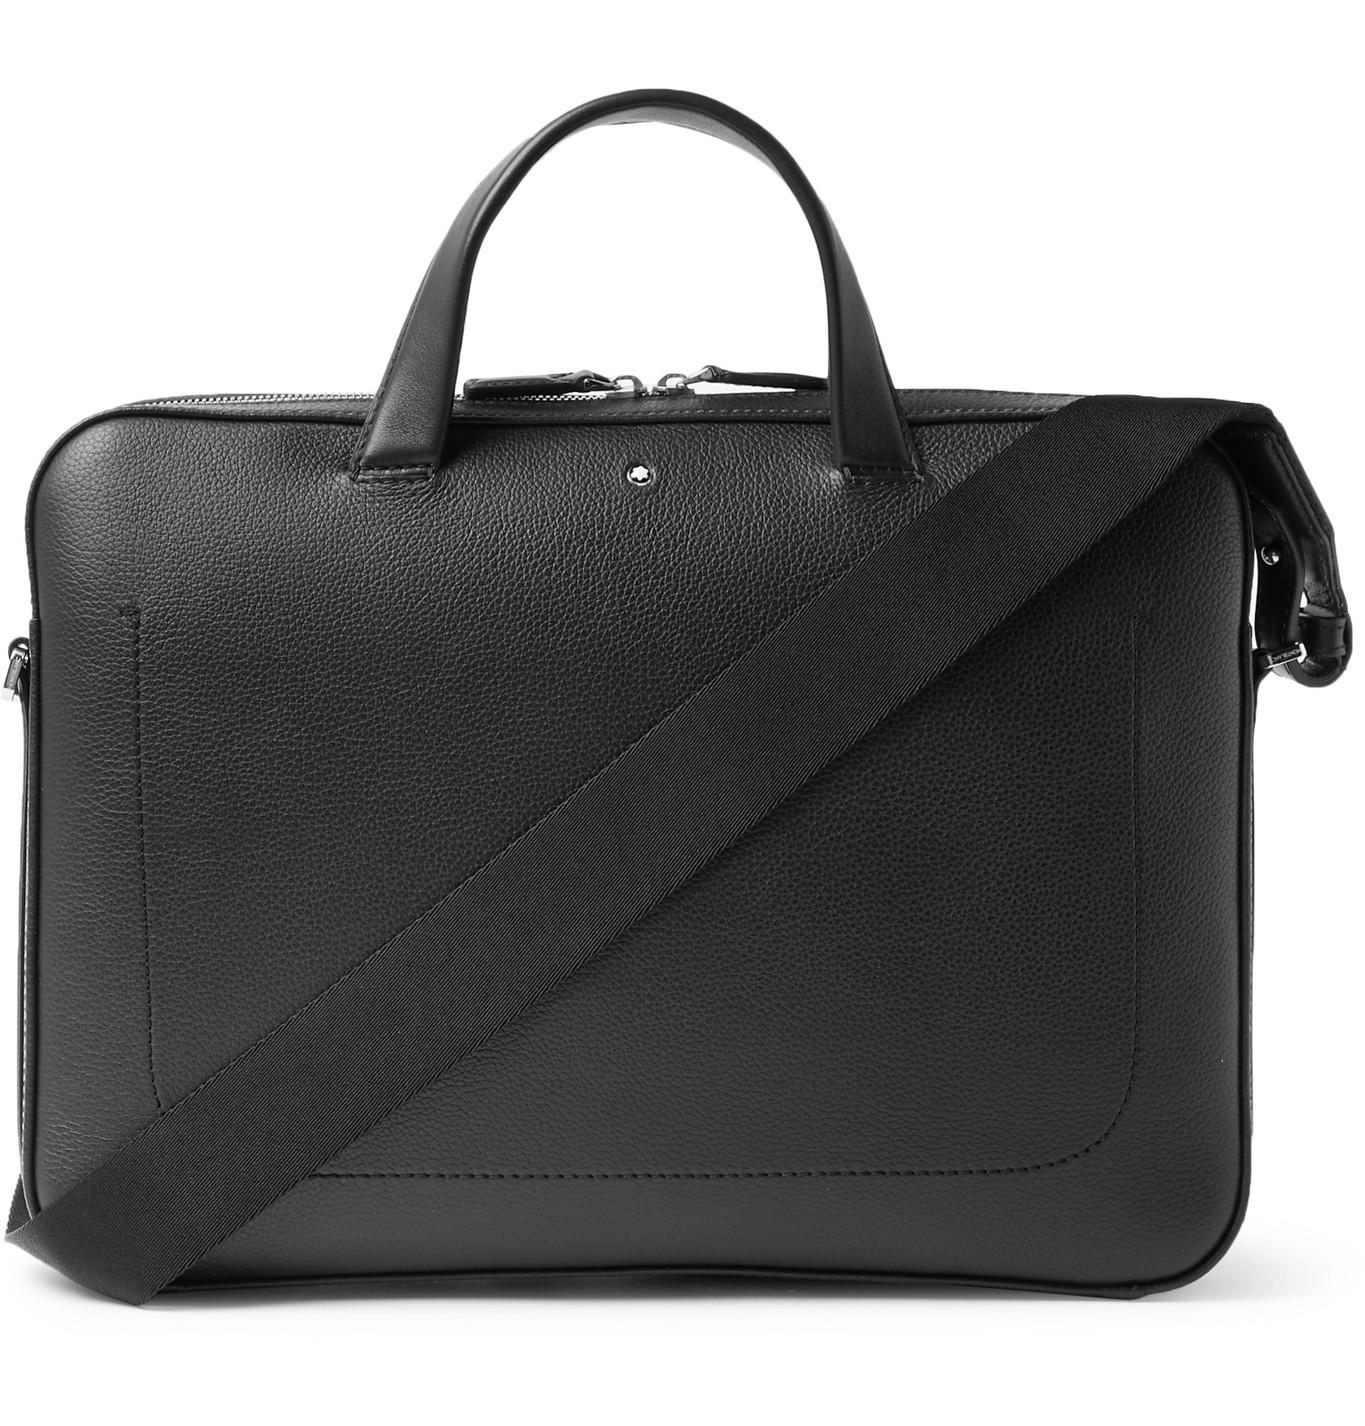 Montblanc Full-grain Leather Briefcase in Black for Men - Lyst